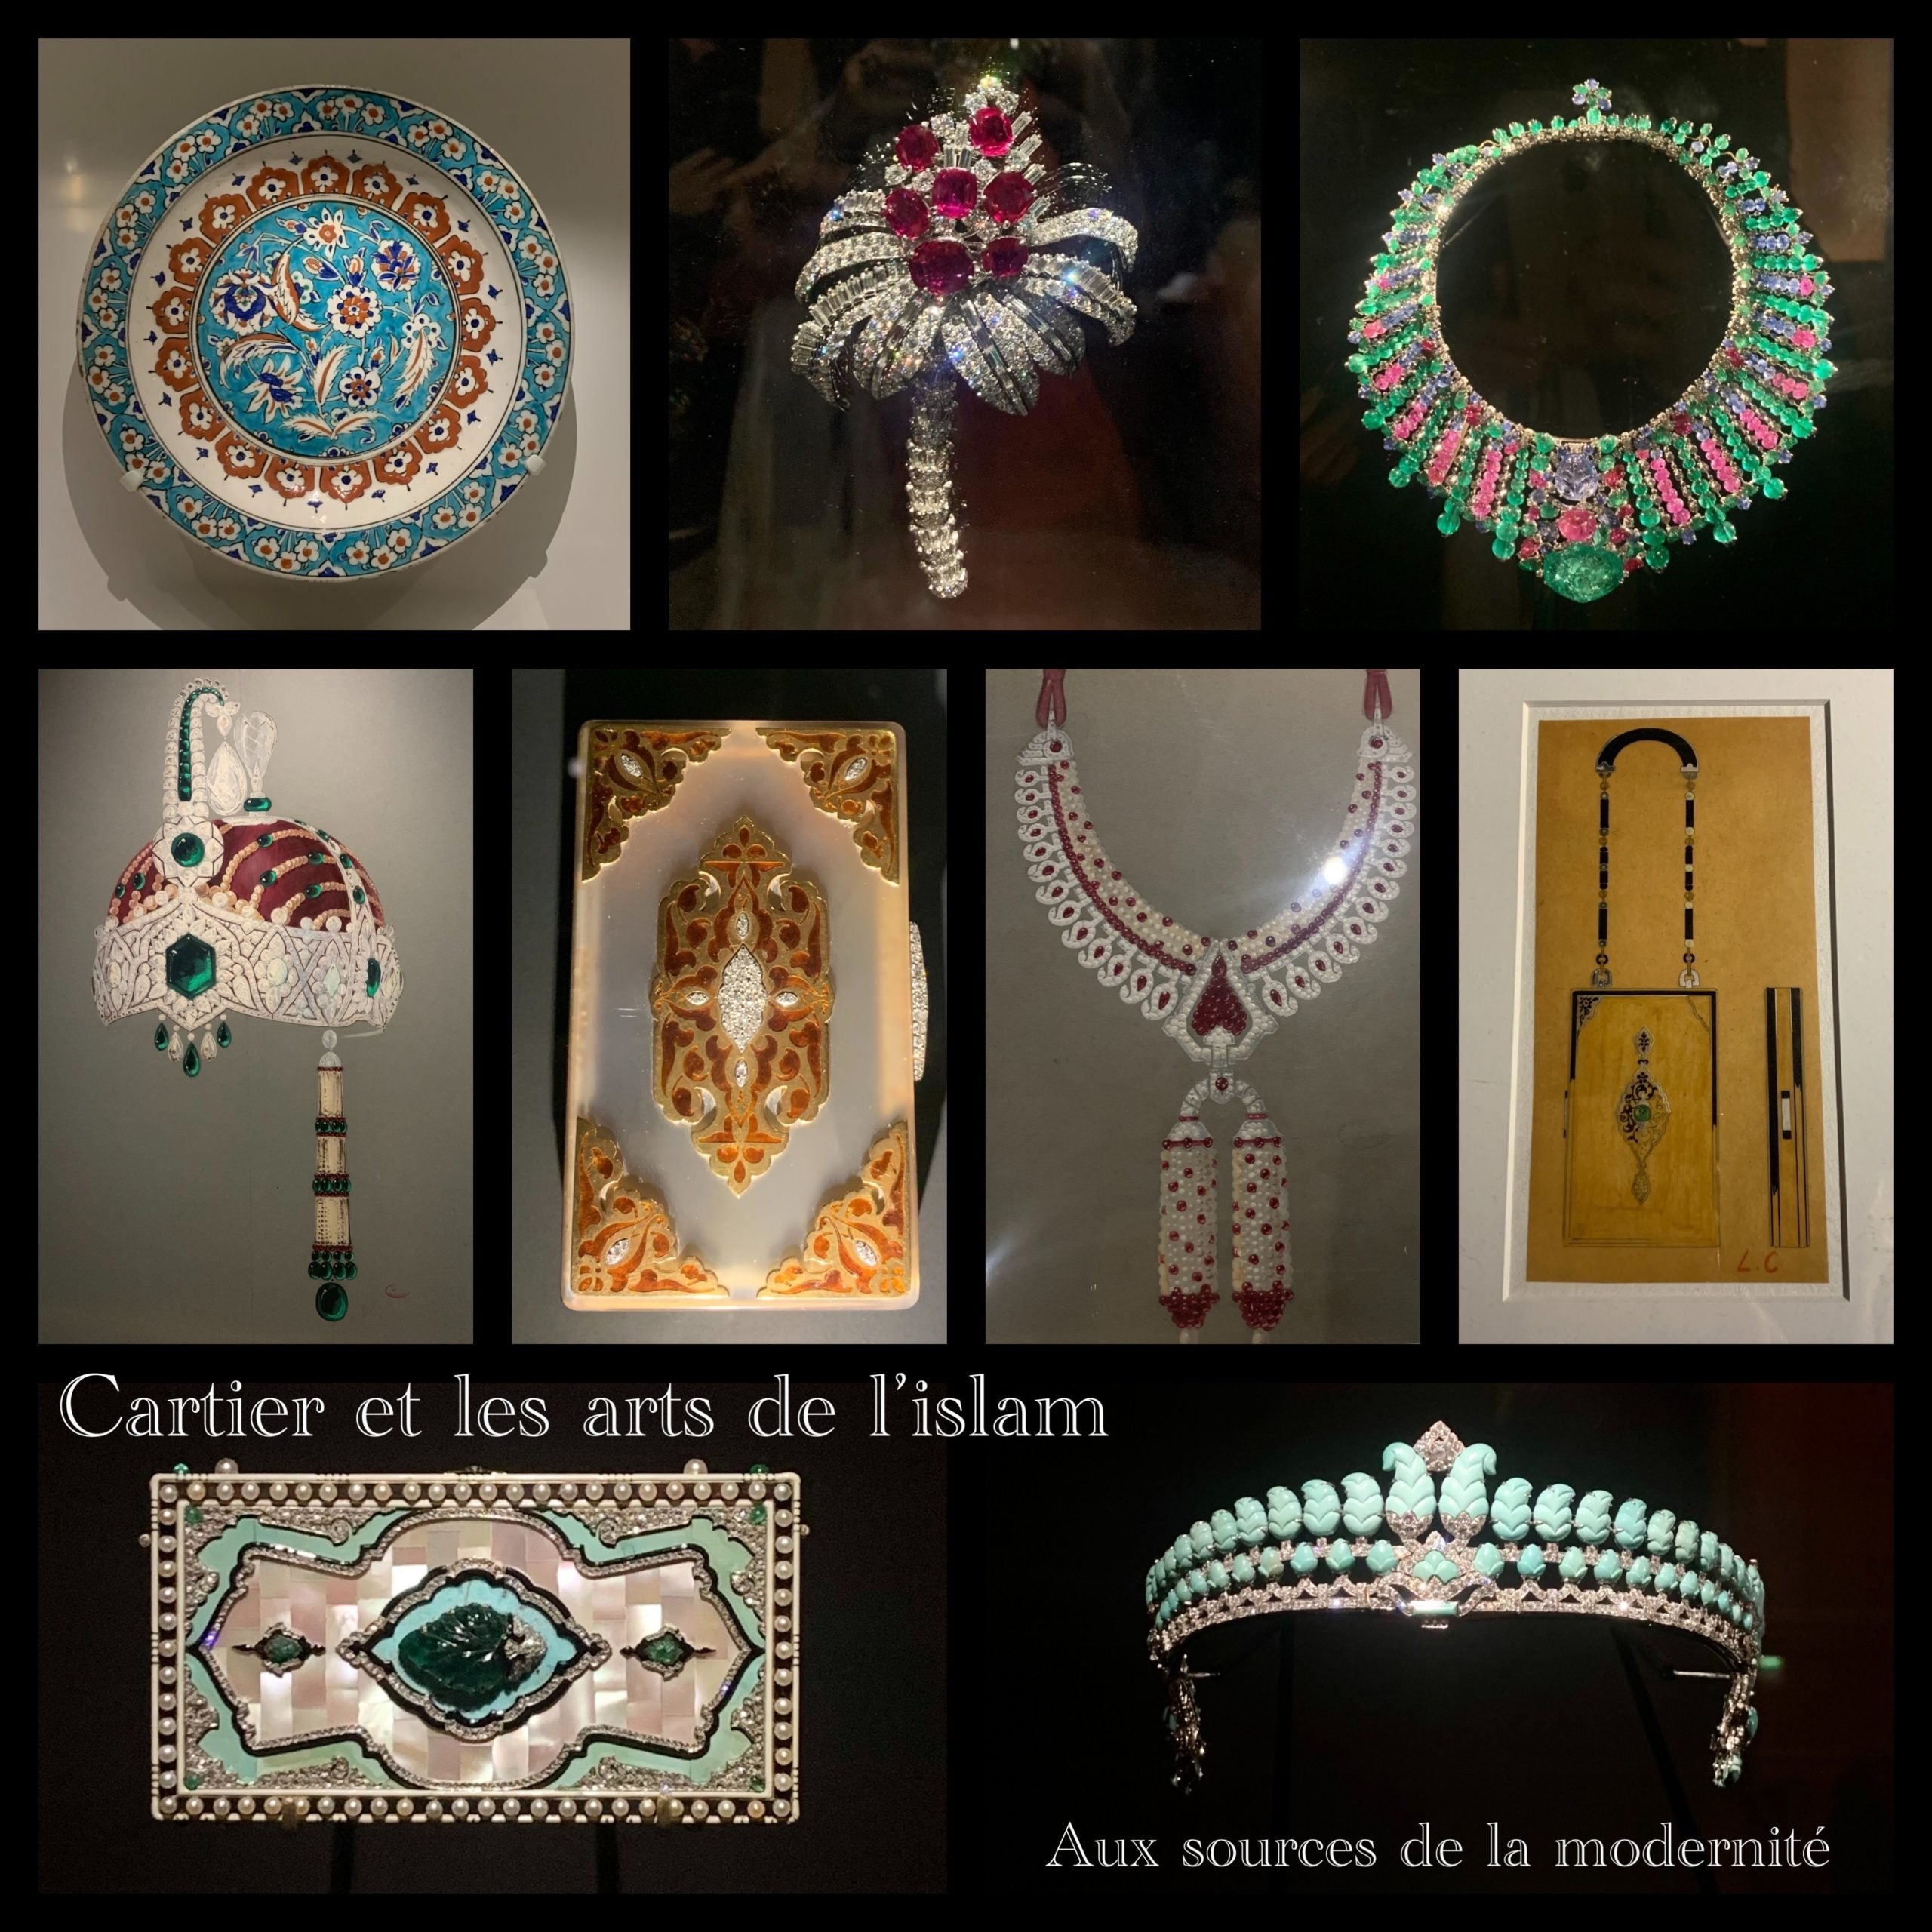 Cartier and the Arts of Islam: The Sources of Modernity Exhibition 